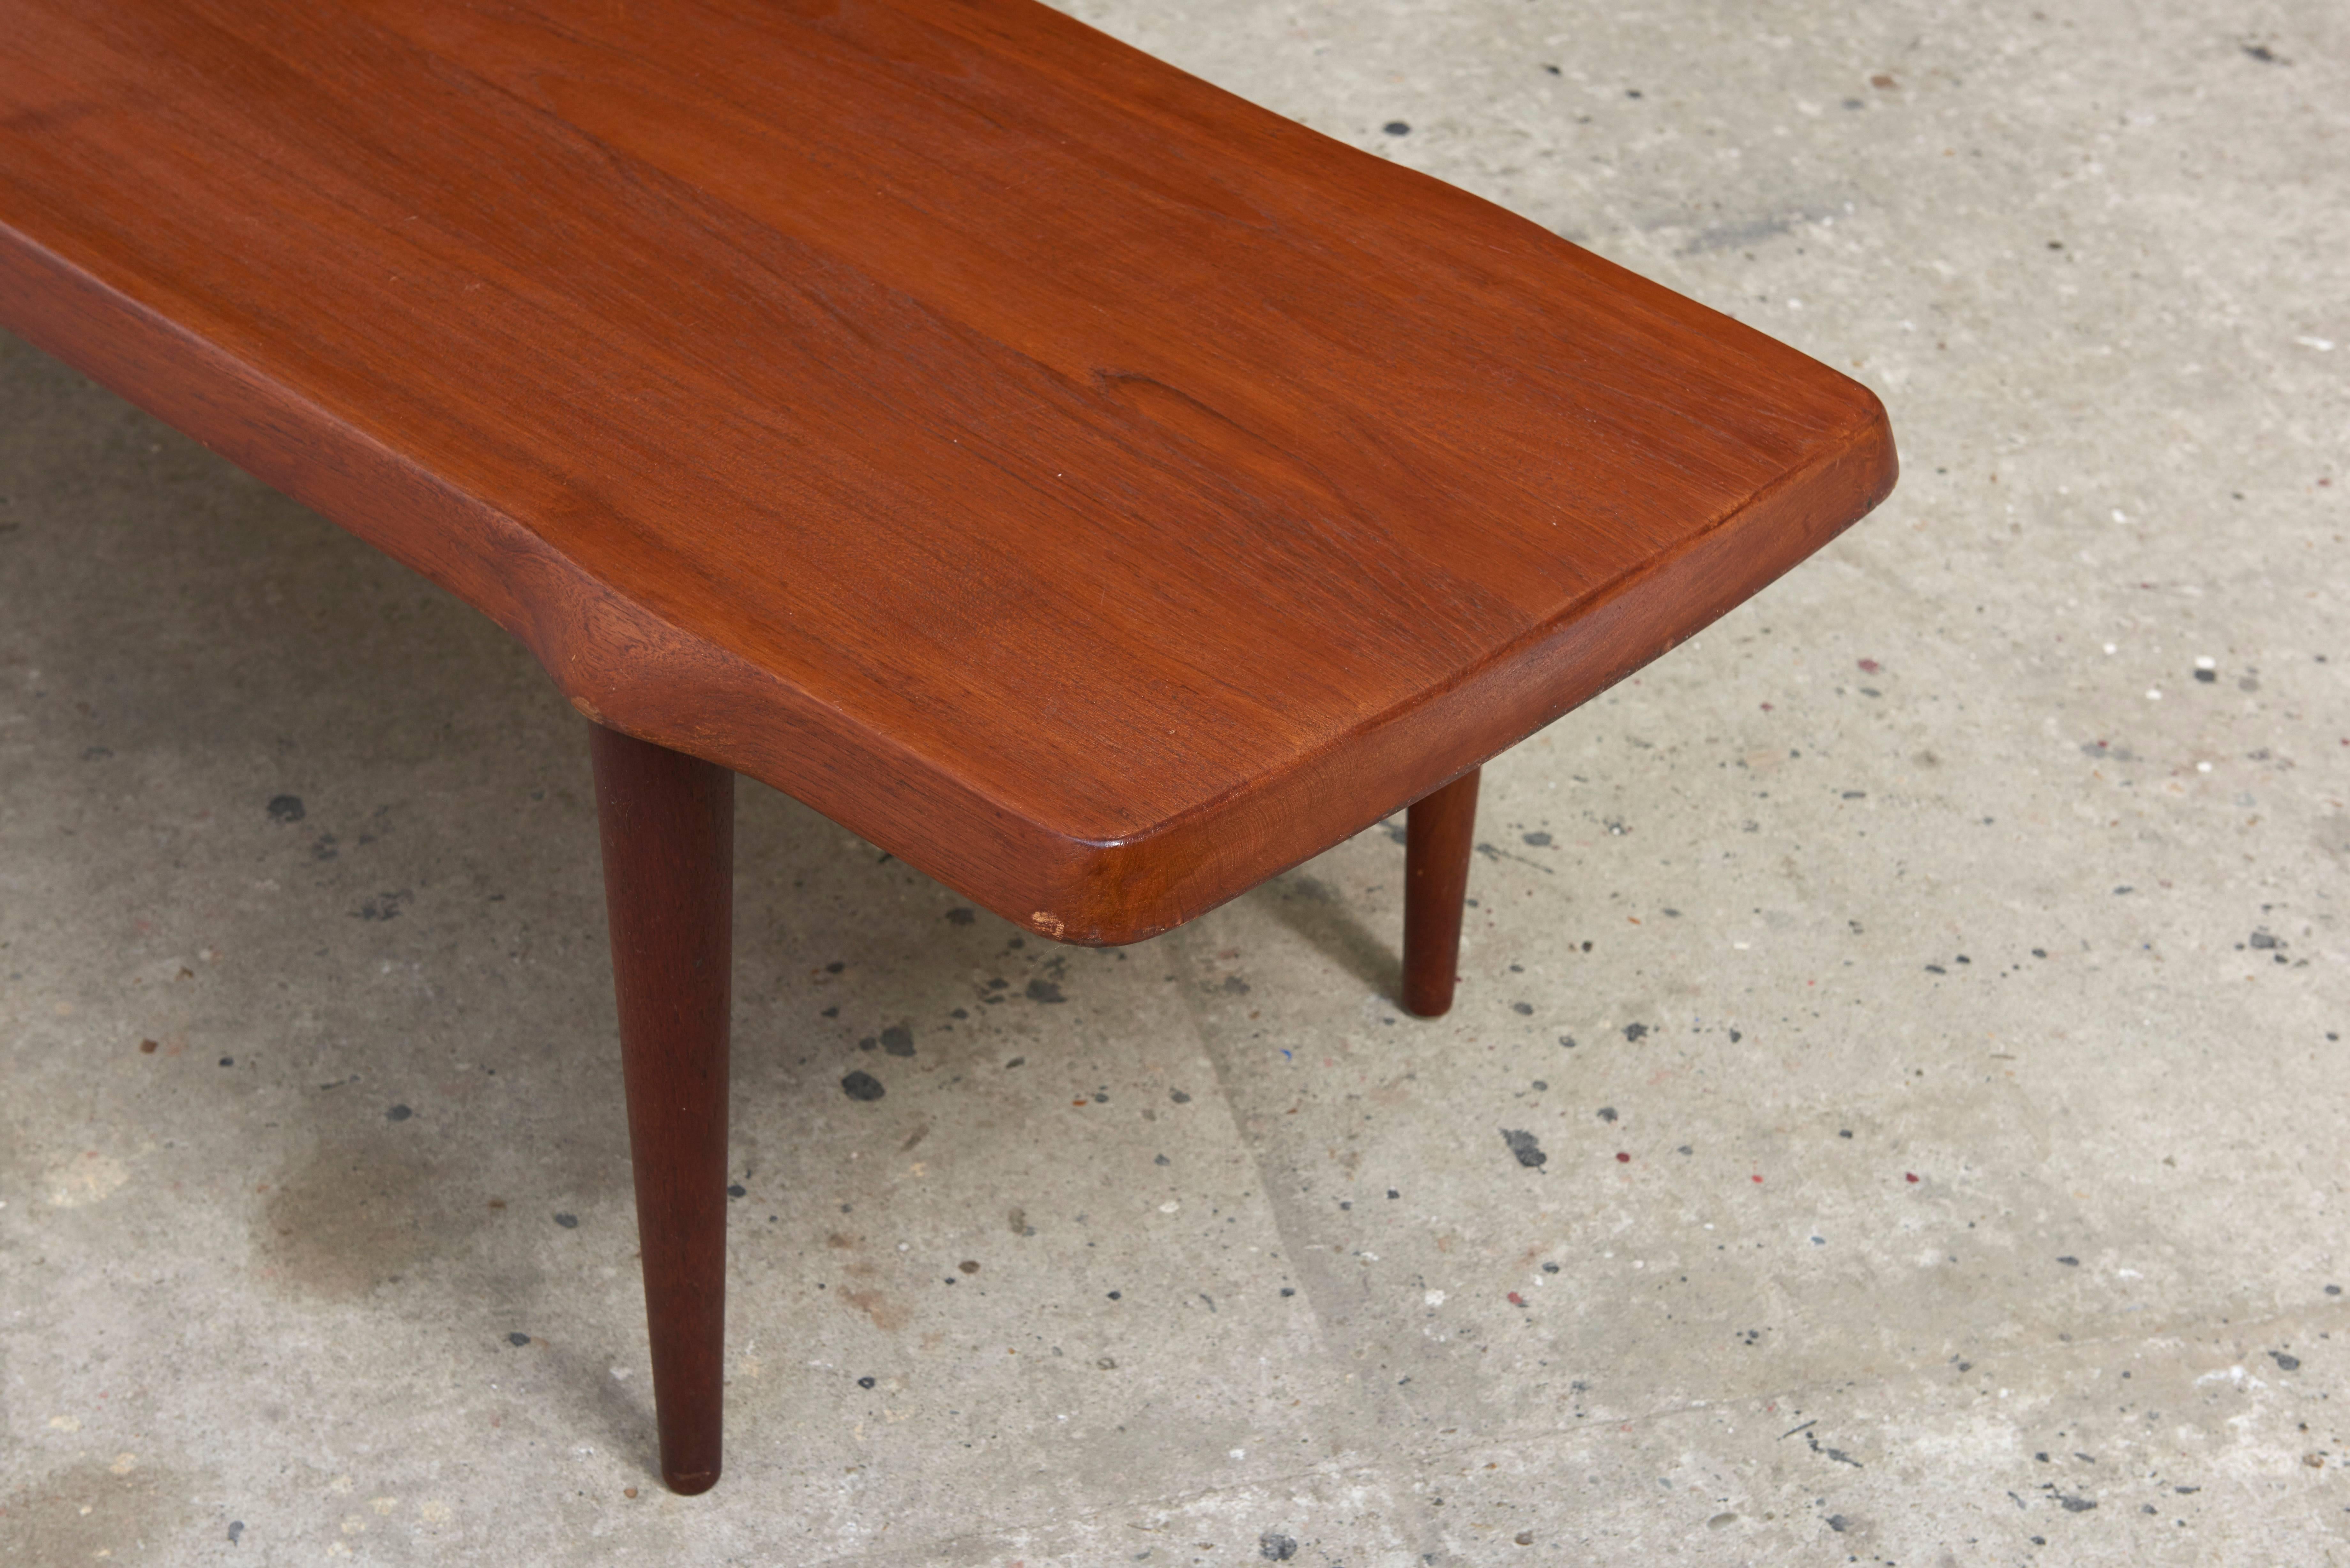 Hand-Crafted Solid Teak Rectangular Coffee Table, Denmark, 1950s